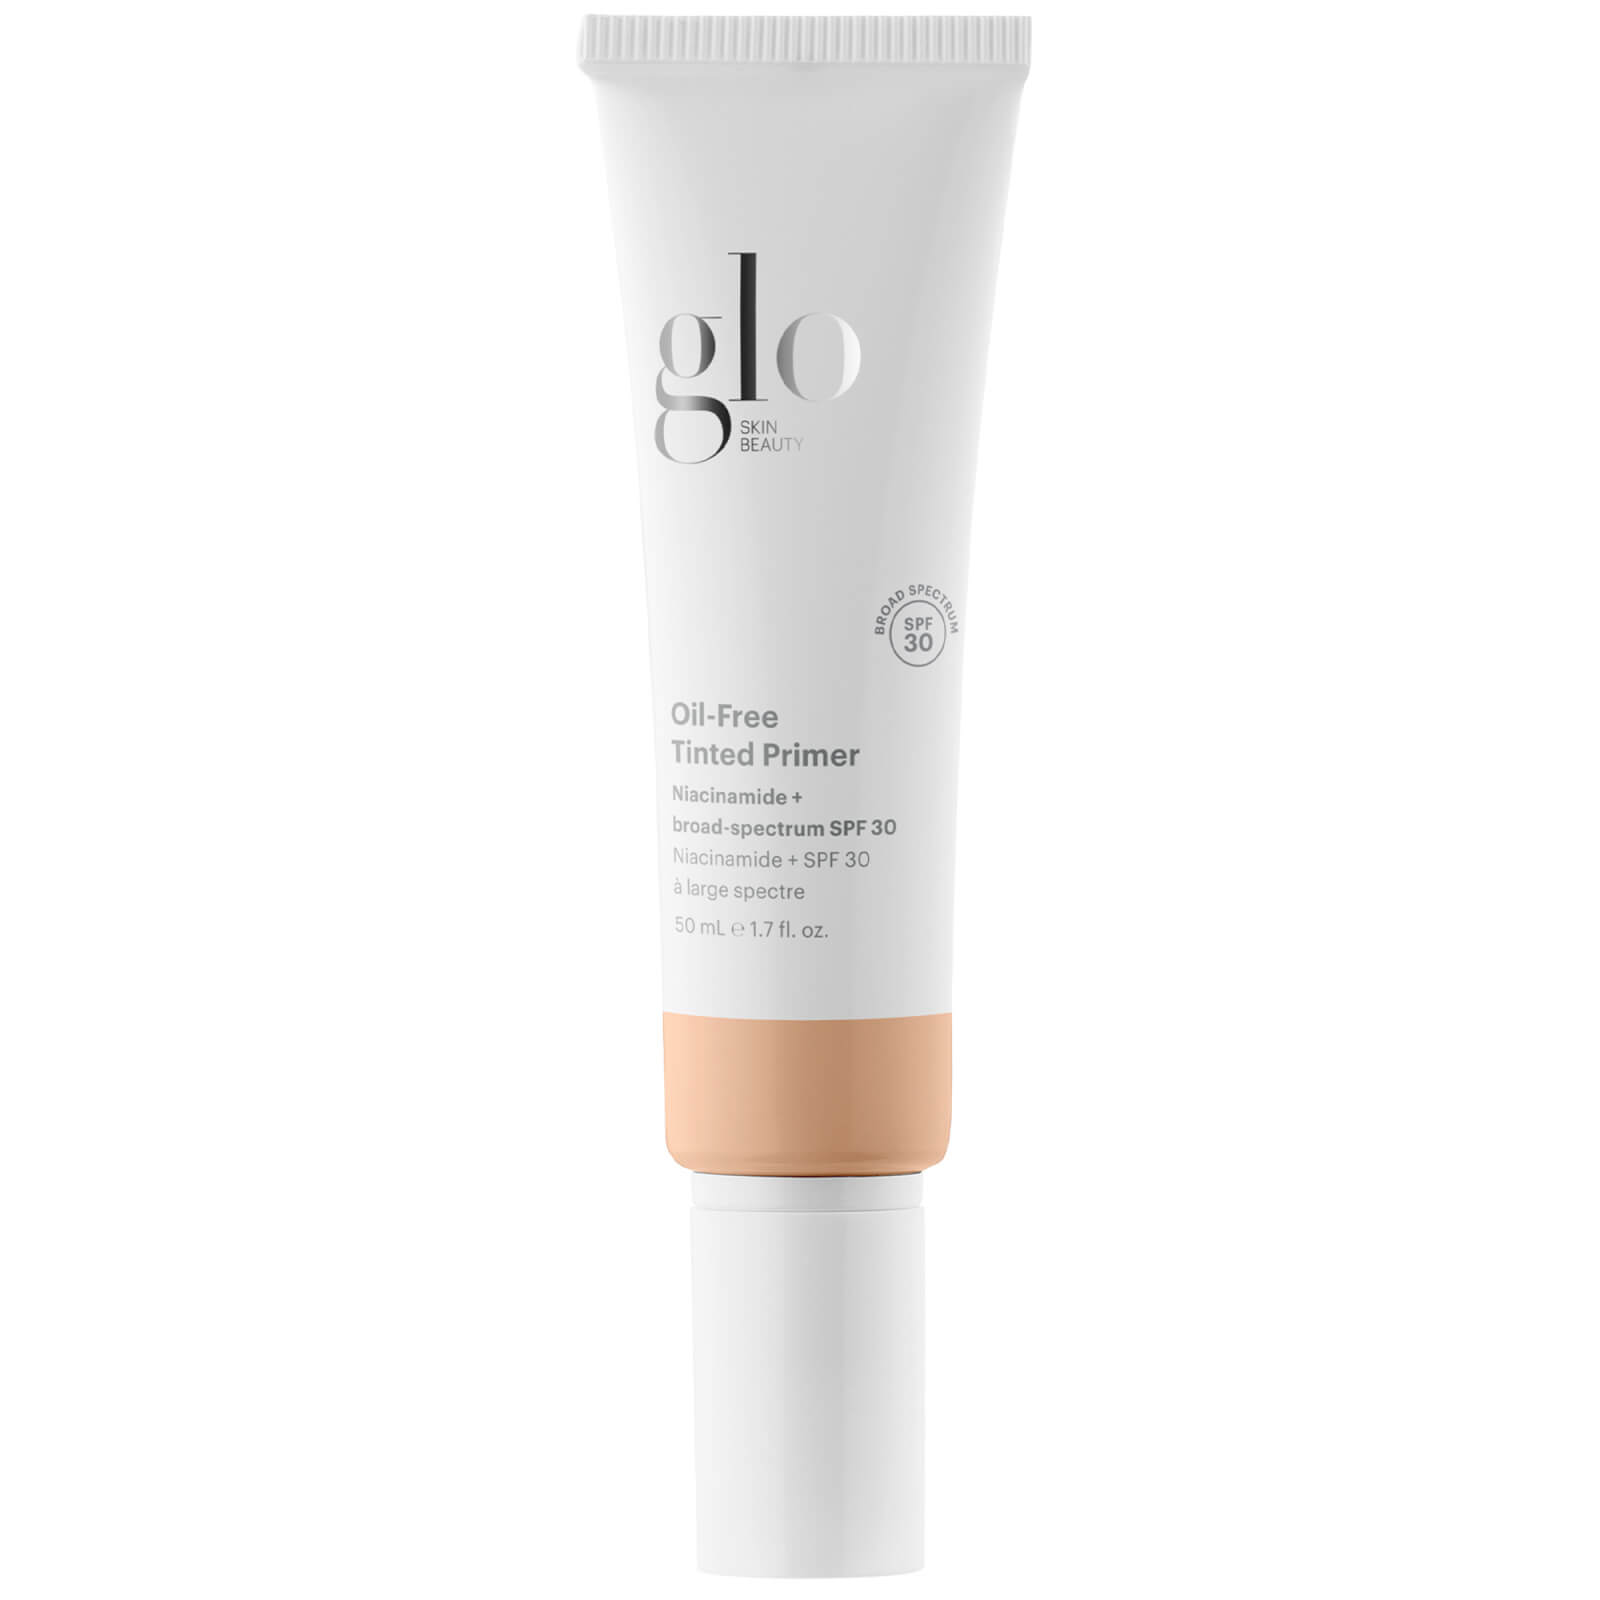 Glo Skin Beauty Oil-free Tinted Primer Spf 30 50ml (various Shades) In Light